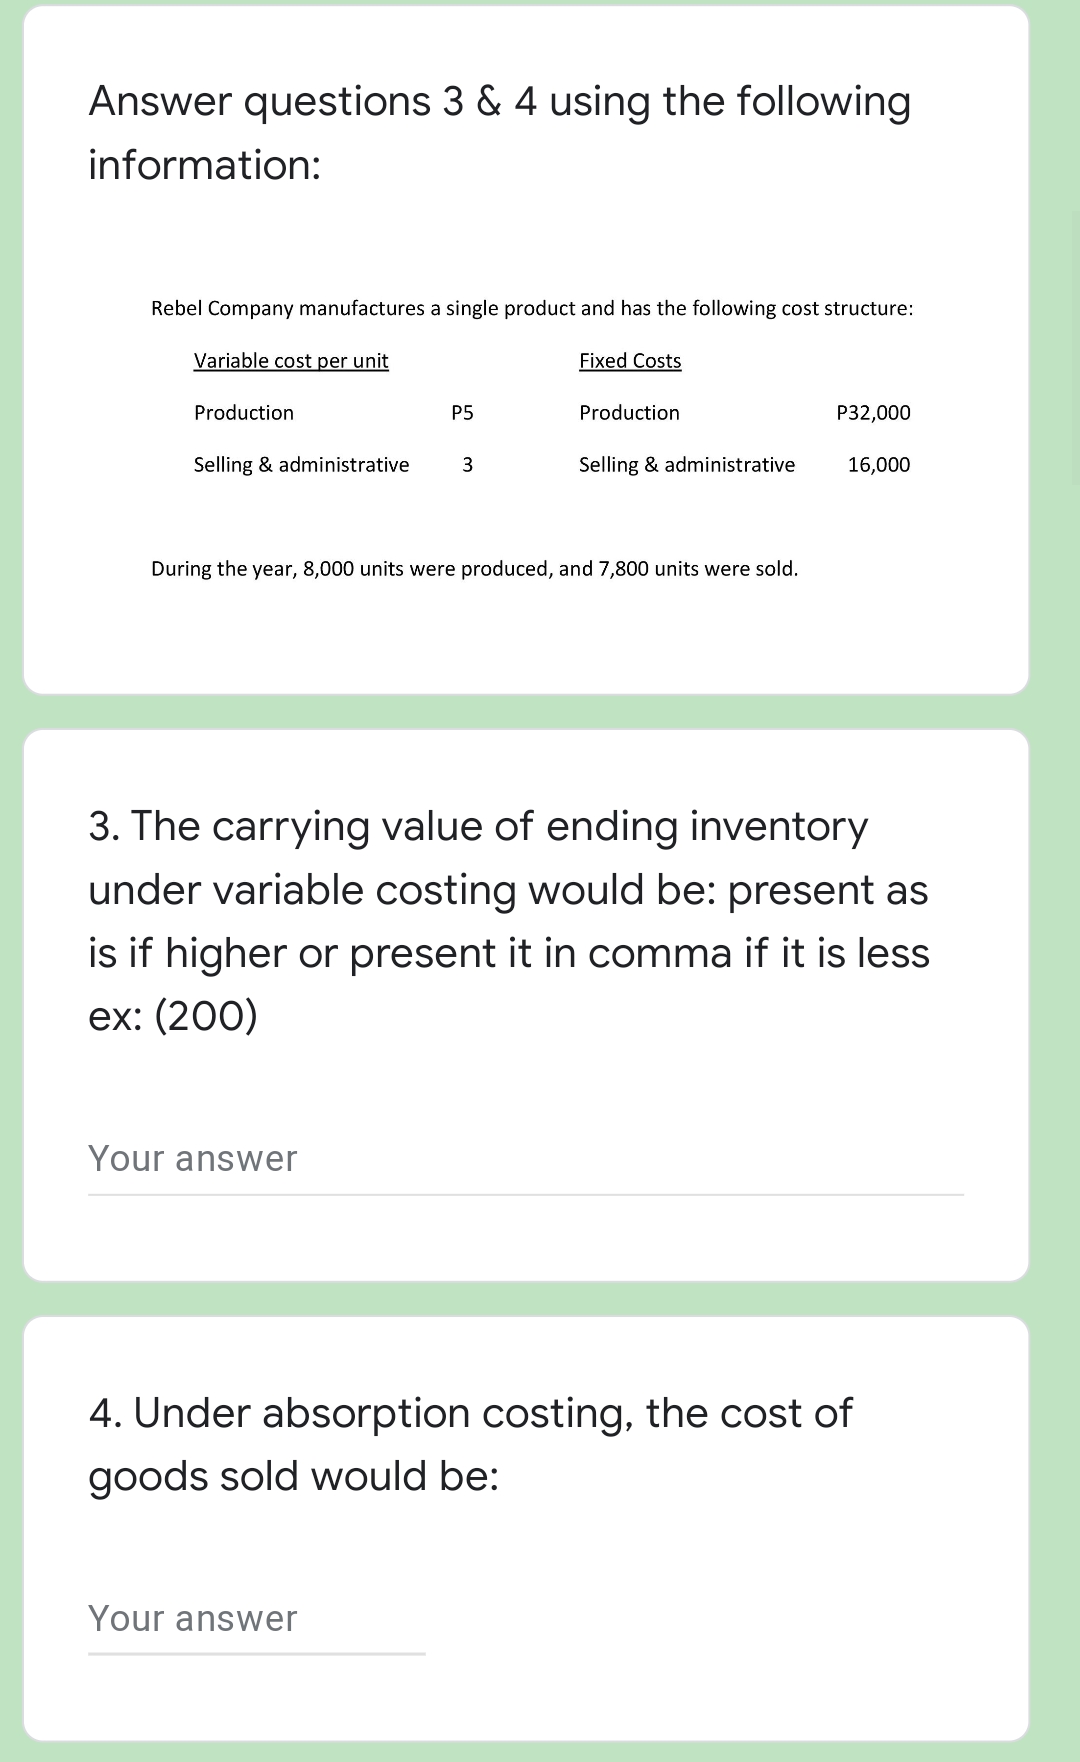 Answer questions 3 & 4 using the following
information:
Rebel Company manufactures a single product and has the following cost structure:
Variable cost per unit
Fixed Costs
Production
Production
P32,000
Selling & administrative
3
Selling & administrative
16,000
During the year, 8,000 units were produced, and 7,800 units were sold.
3. The carrying value of ending inventory
under variable costing would be: present as
is if higher or present it in comma if it is less
ex: (200)
Your answer
4. Under absorption costing, the cost of
goods sold would be:
Your answer
